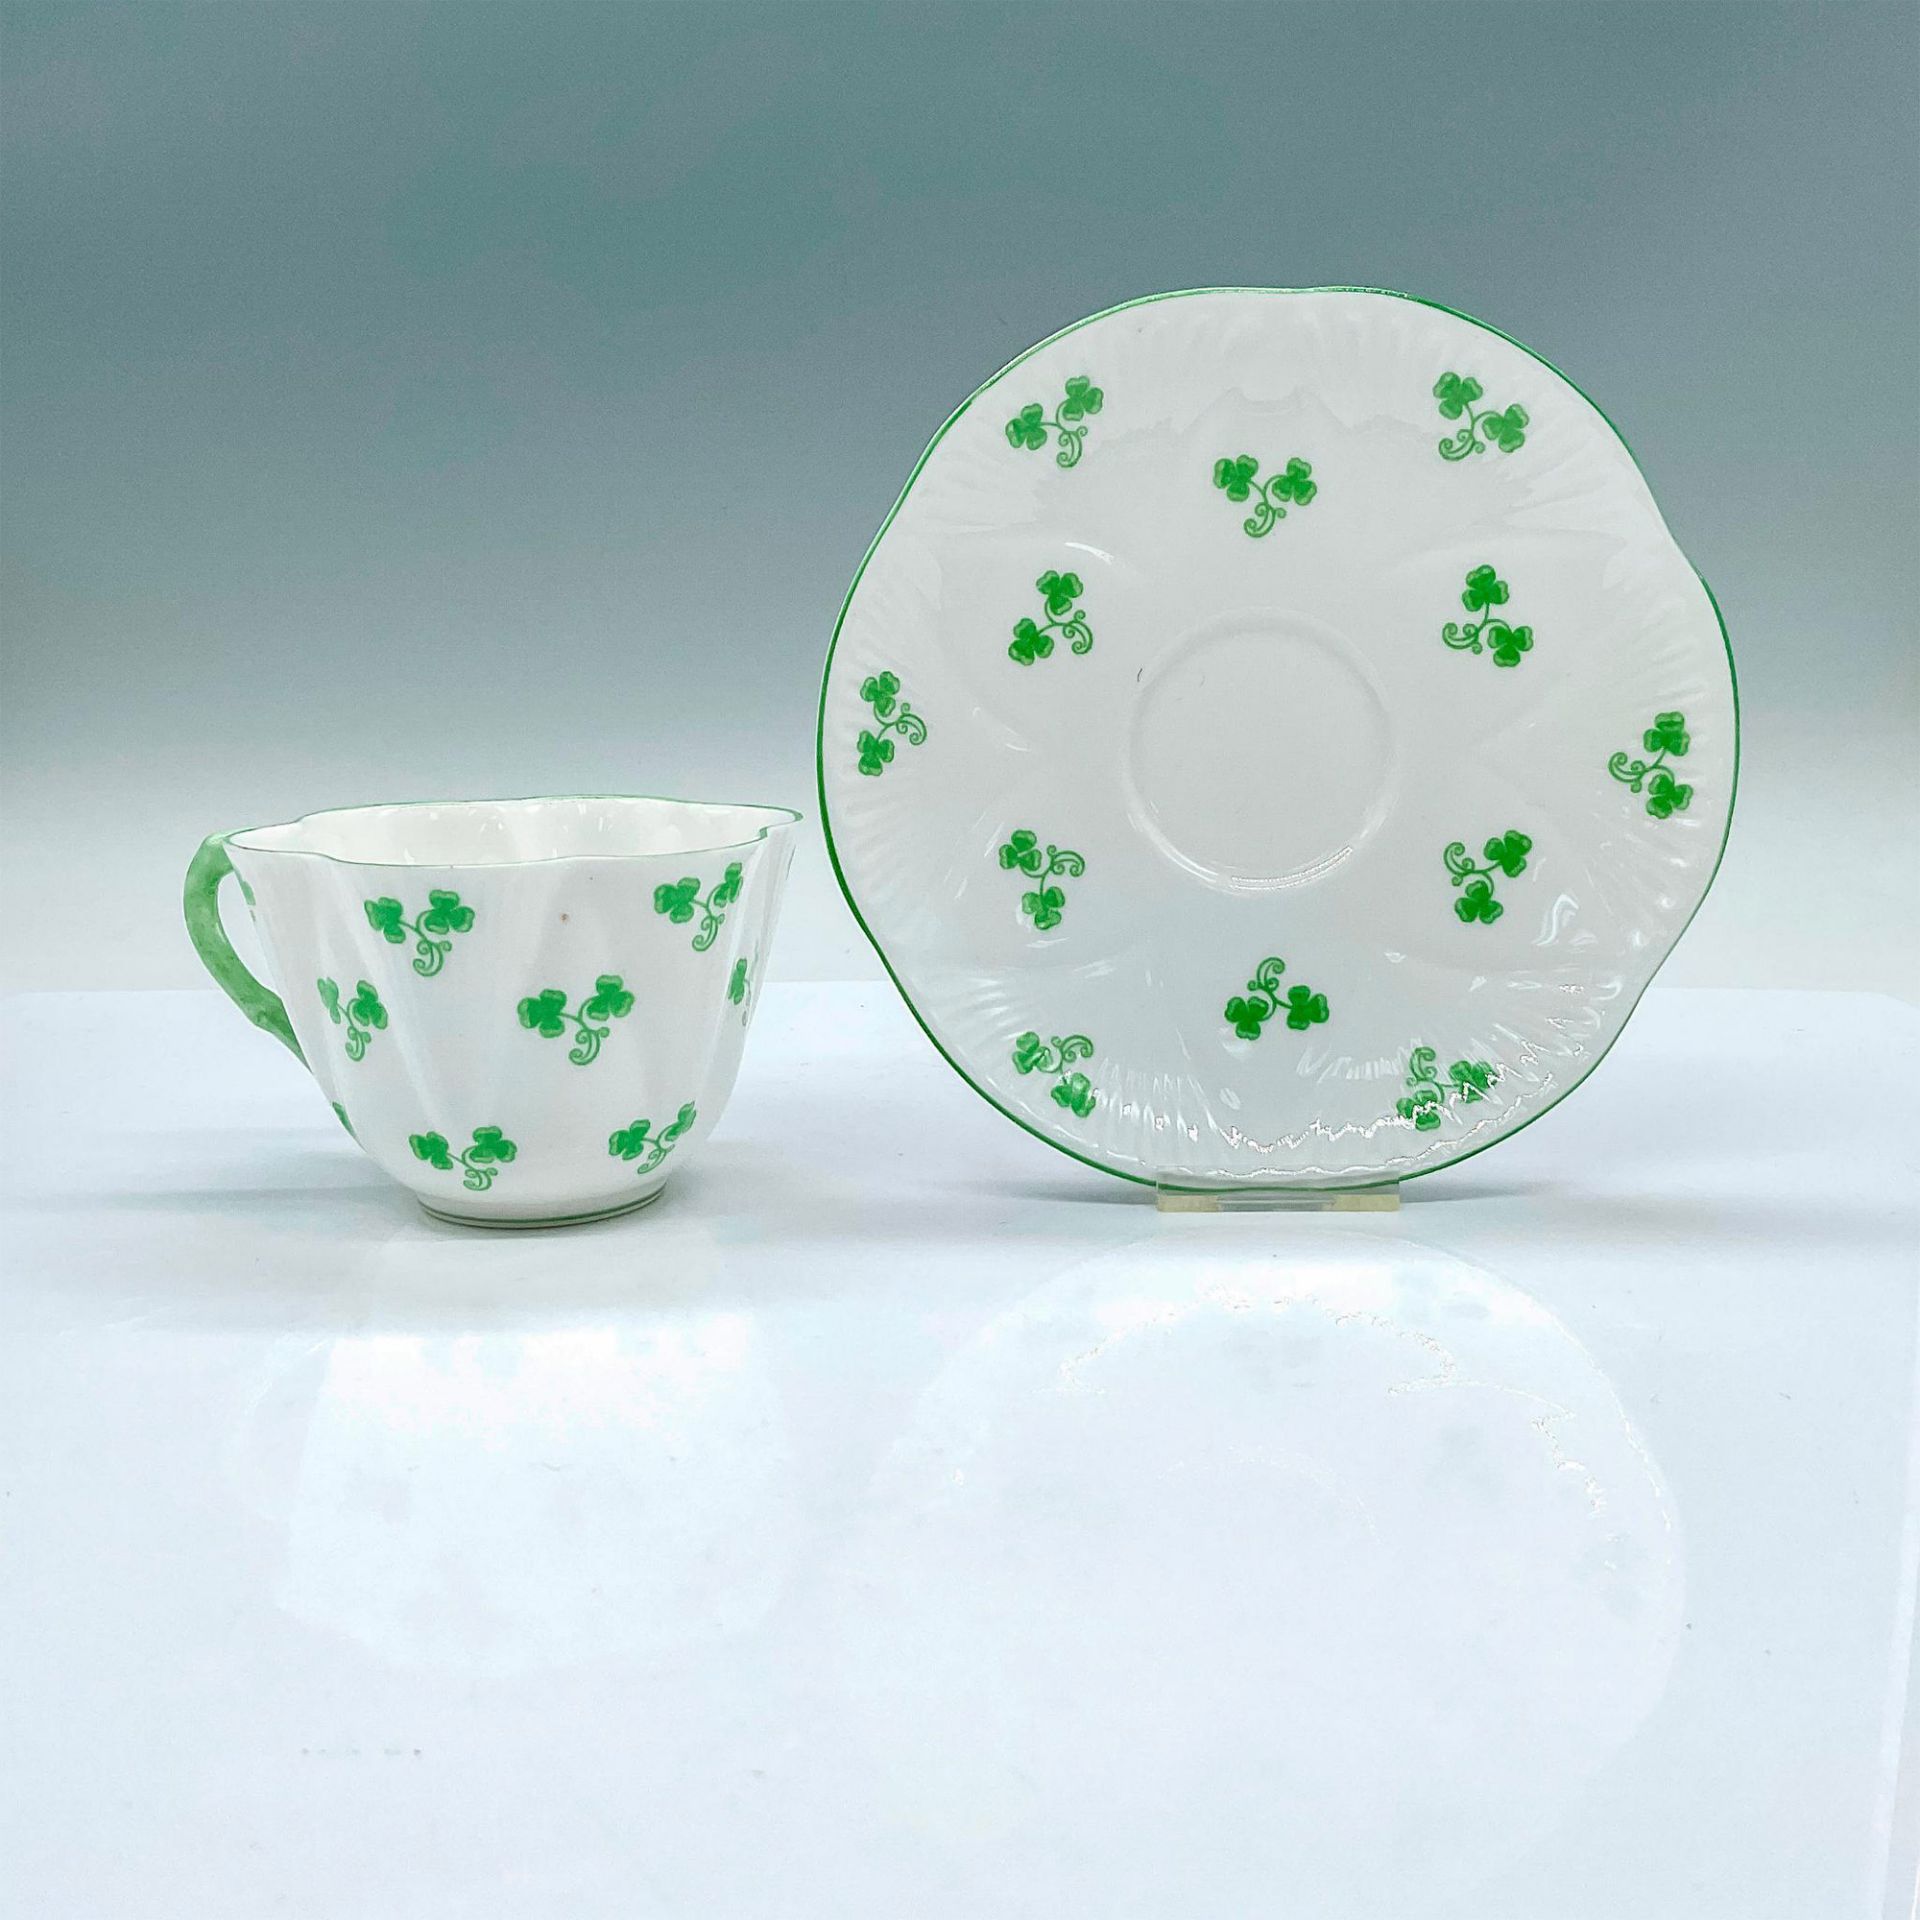 2pc Shelley China Teacup and Saucer, Shamrock - Image 2 of 3